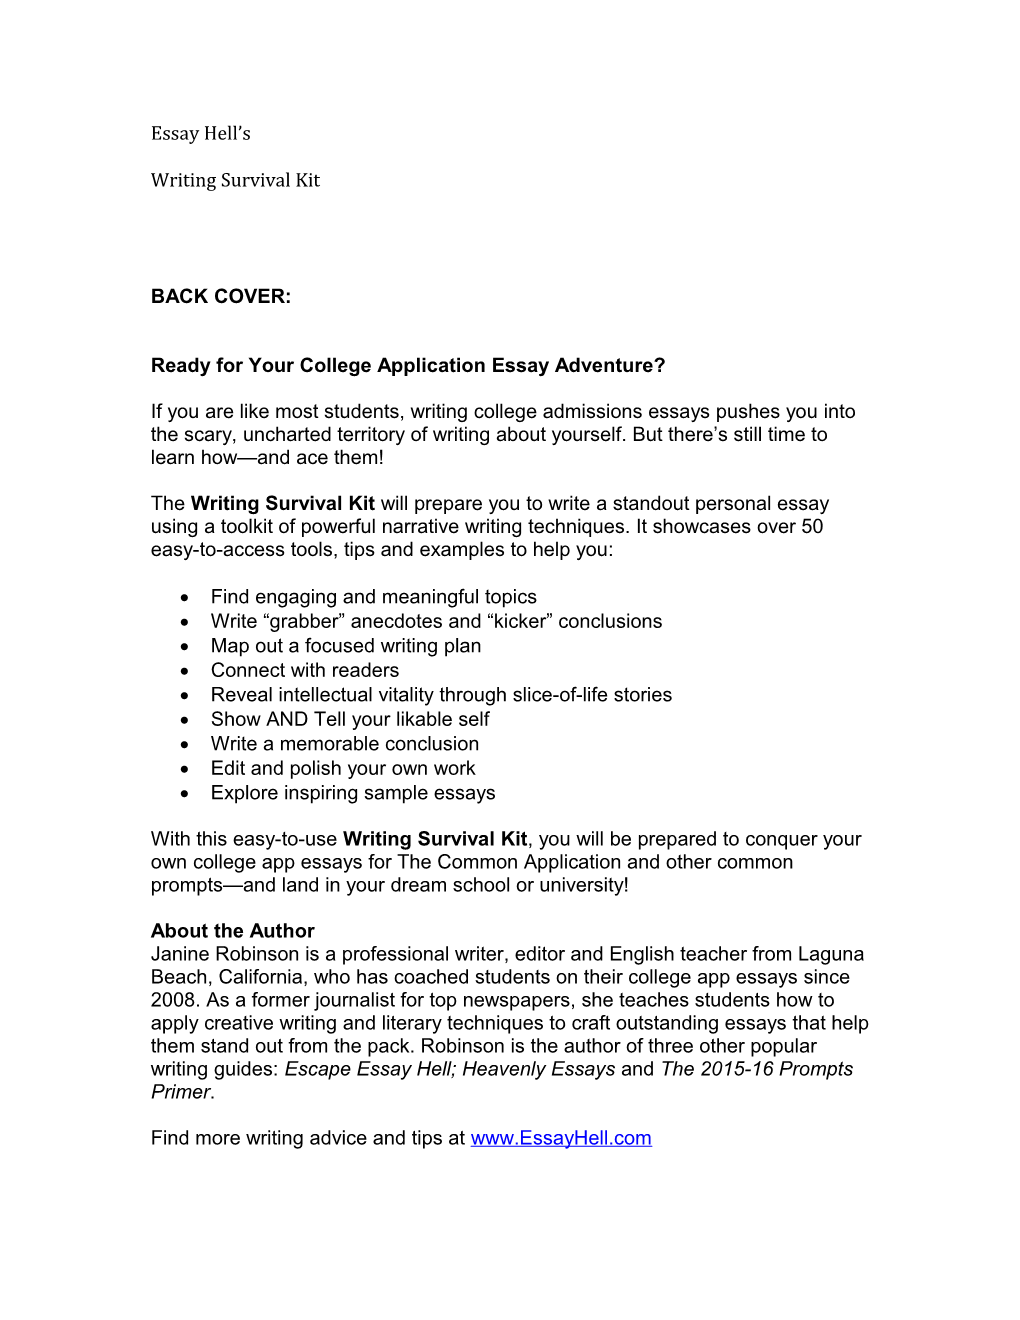 Ready for Your College Application Essay Adventure?